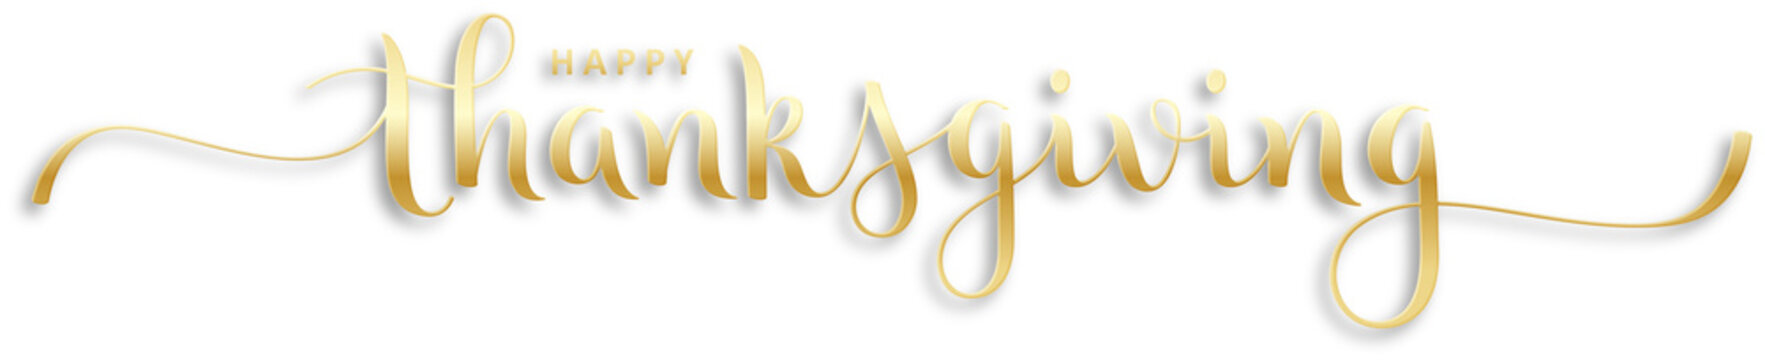 HAPPY THANKSGIVING metallic gold brush calligraphy banner with swashes on transparent banner